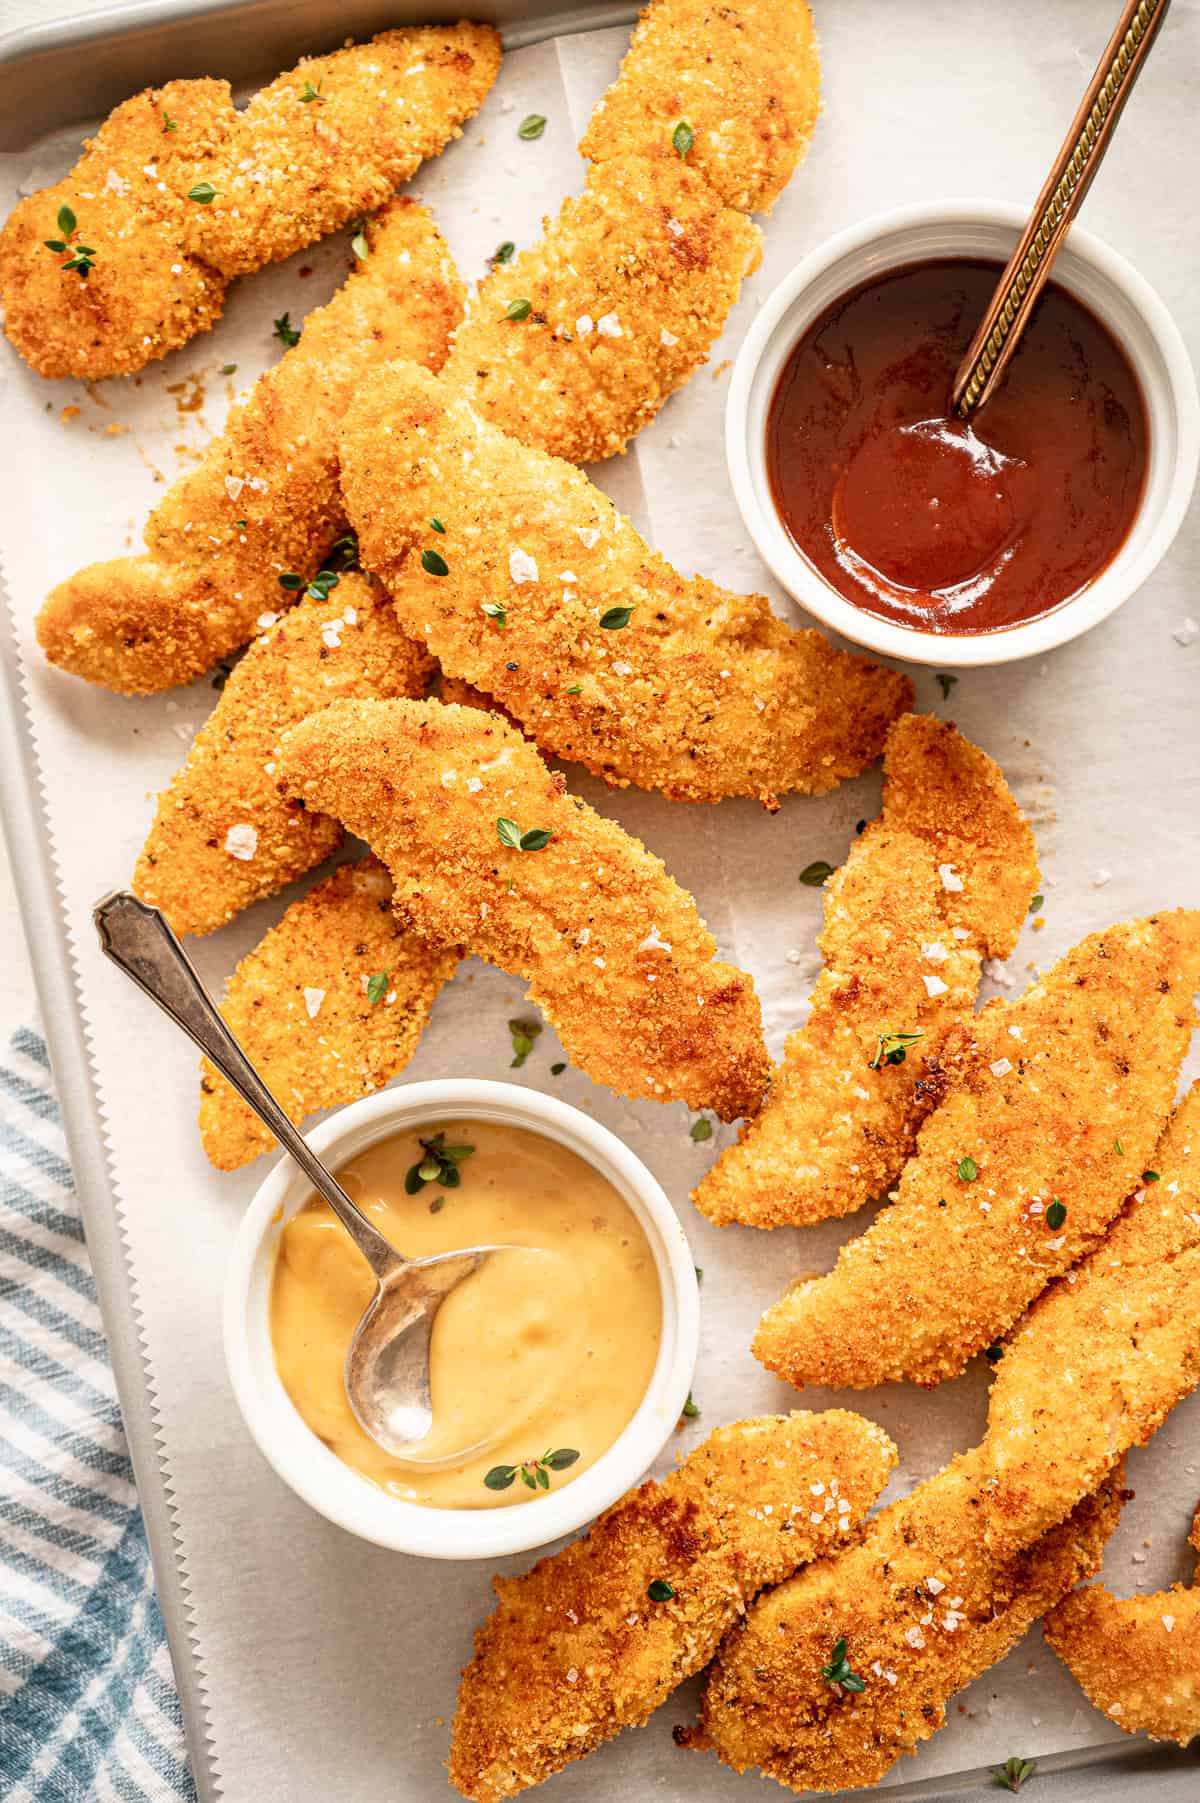 Parmesan chicken tenders on a parchment lined baking sheet with small bowls of honey mustard and ketchup on the side.